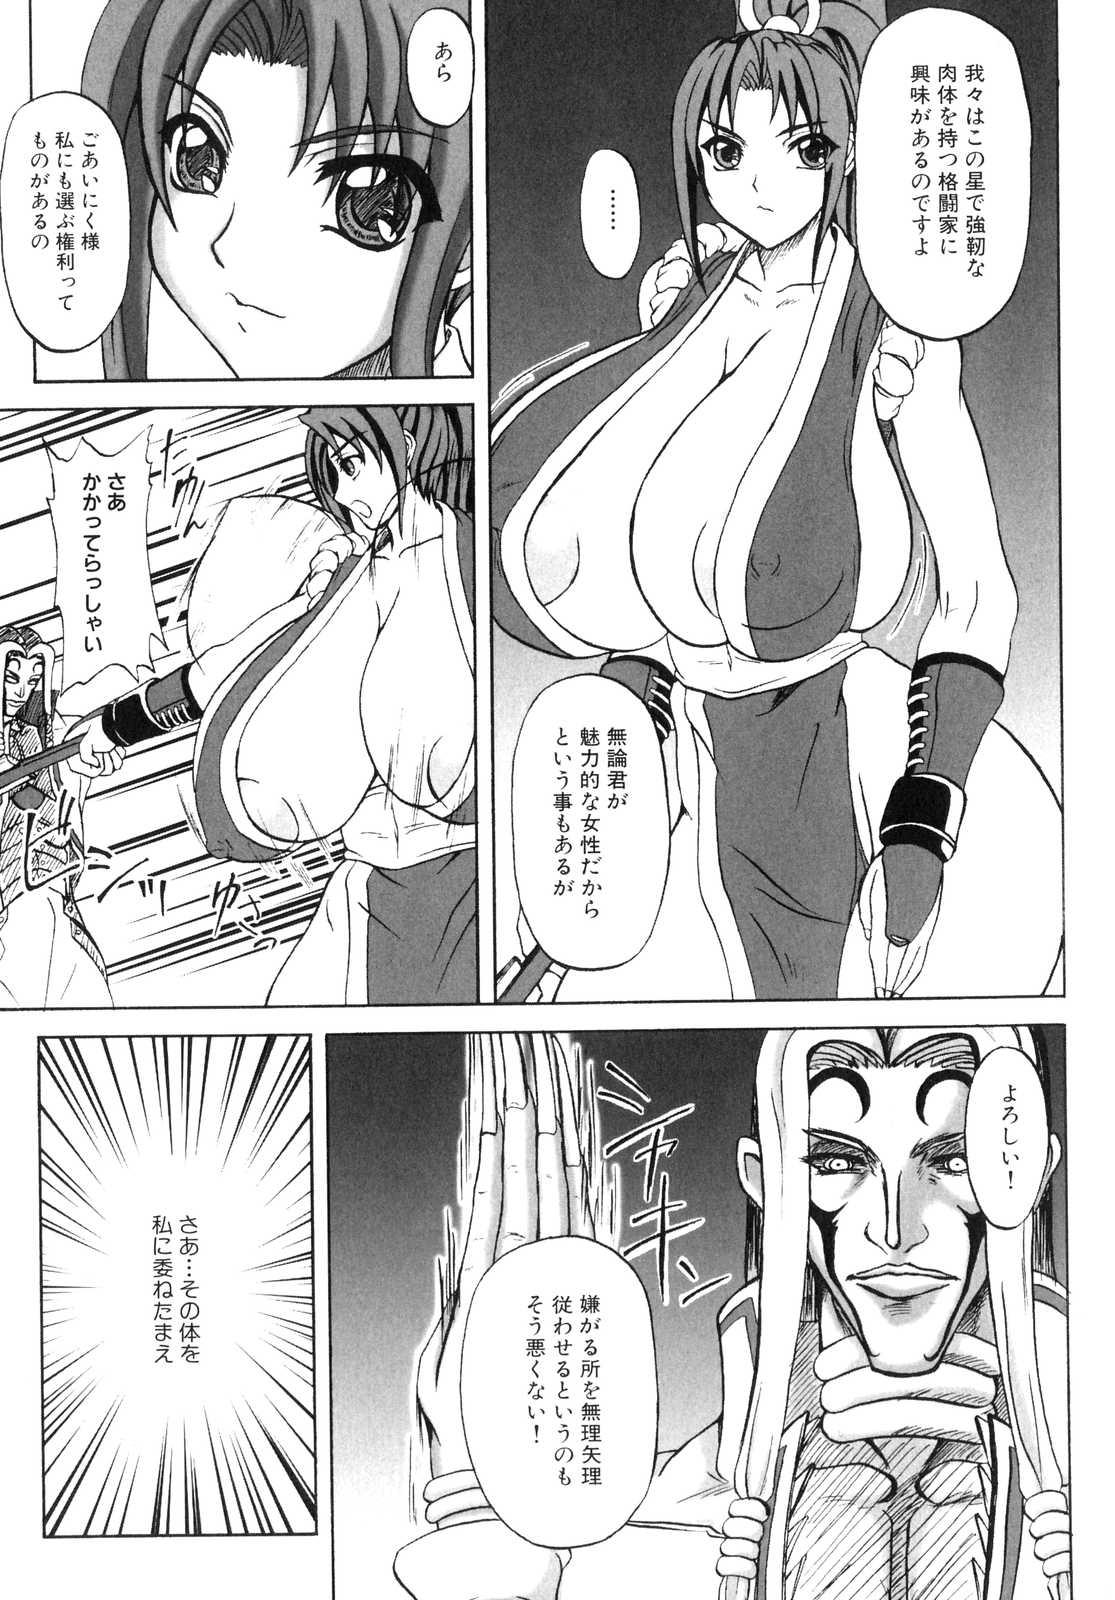 Free Teenage Porn Mars Impact - King of fighters Big Boobs - Page 4